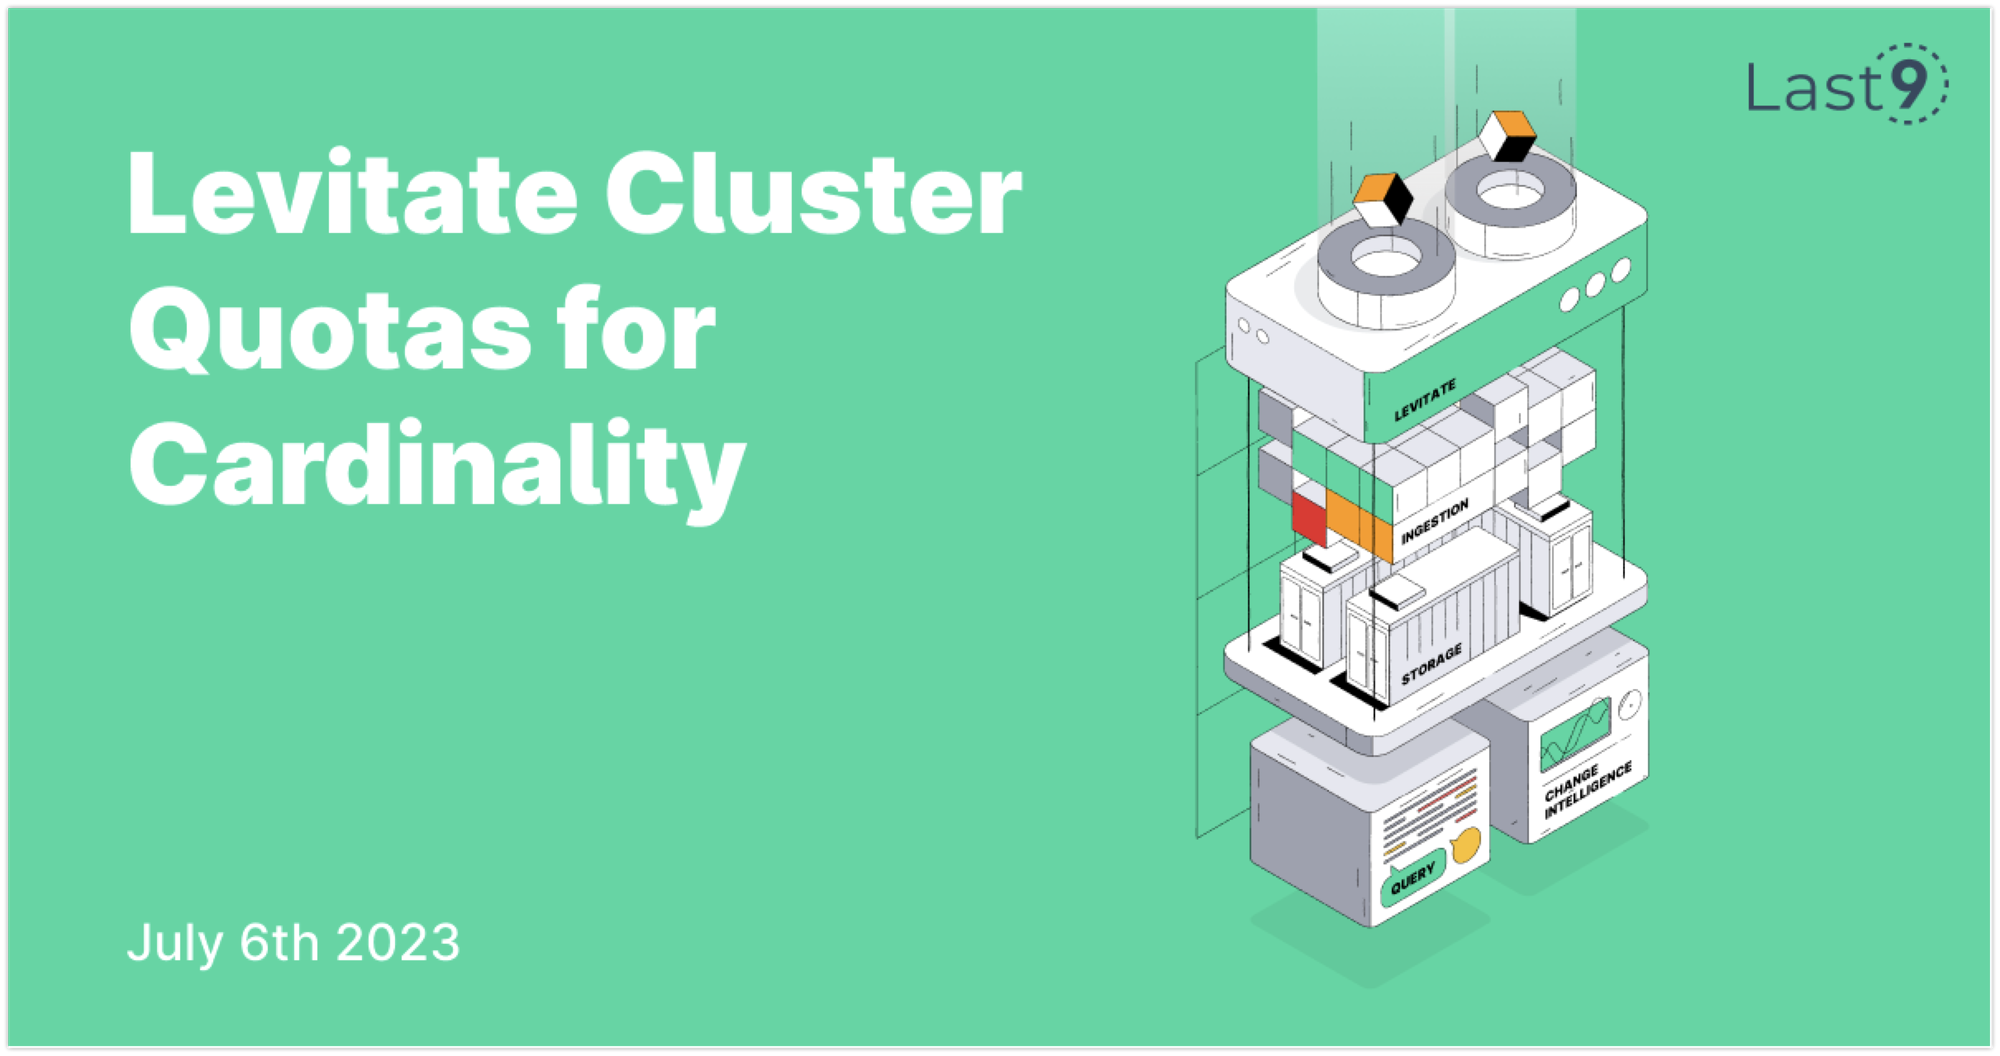 Levitate Cluster Quotas for Cardinality